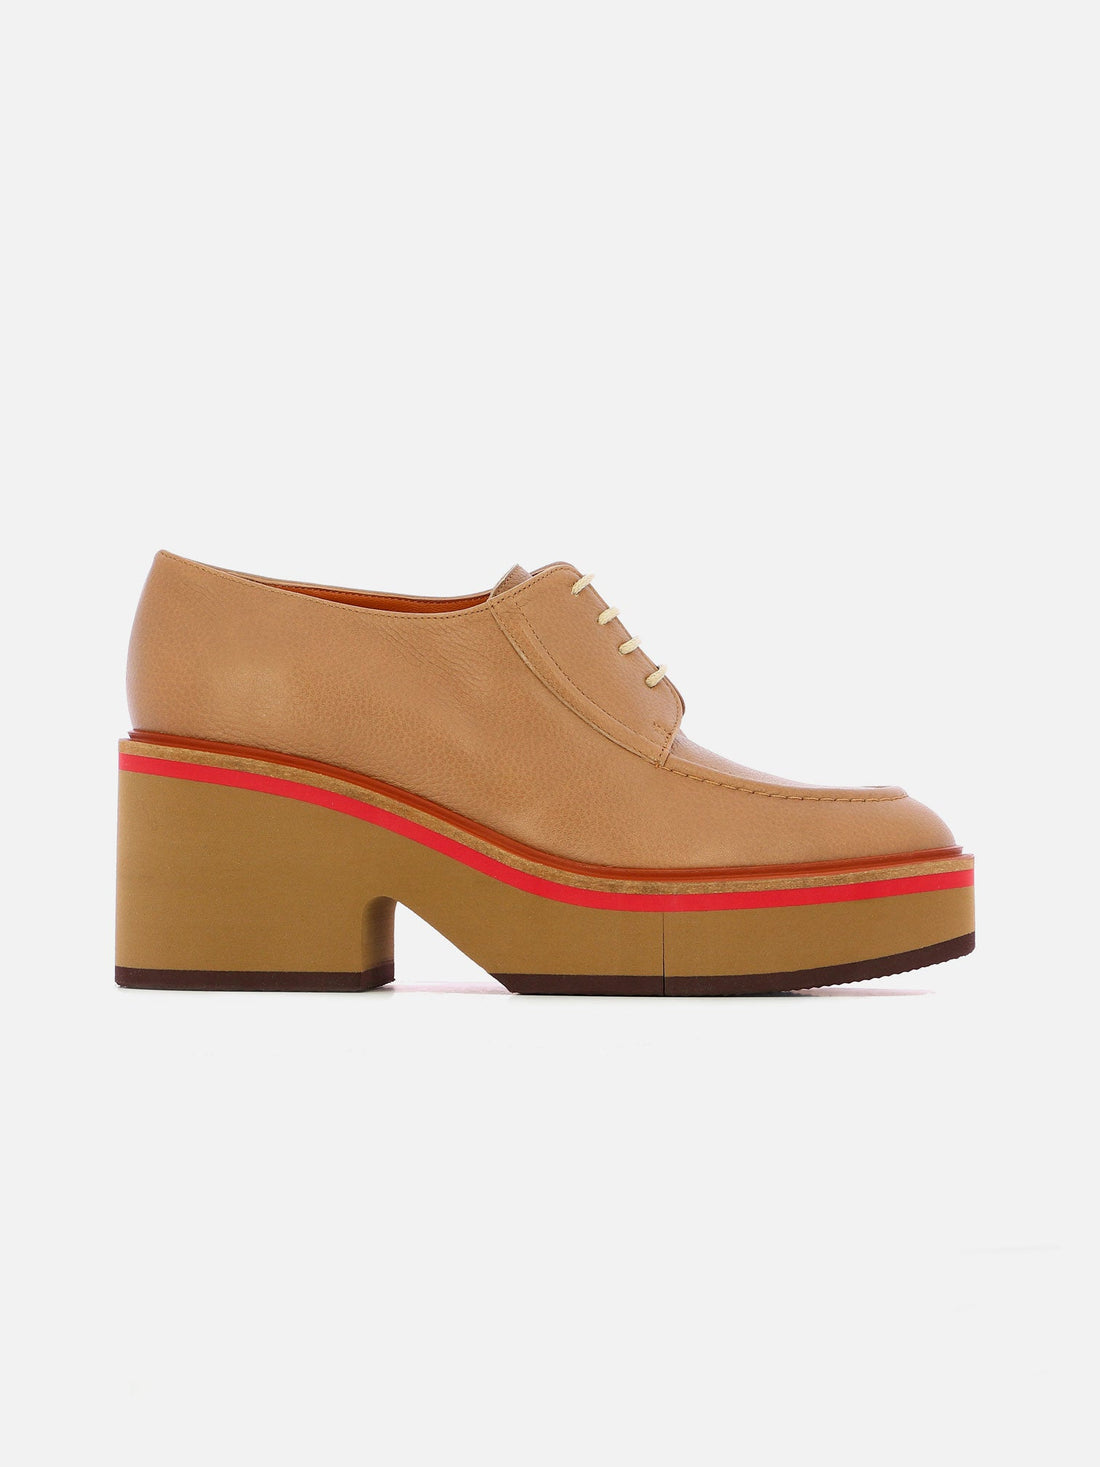 DERBIES - ANJA grained leather beige || OUTLET - ANJA1BEITUMM420 - Clergerie Paris - USA